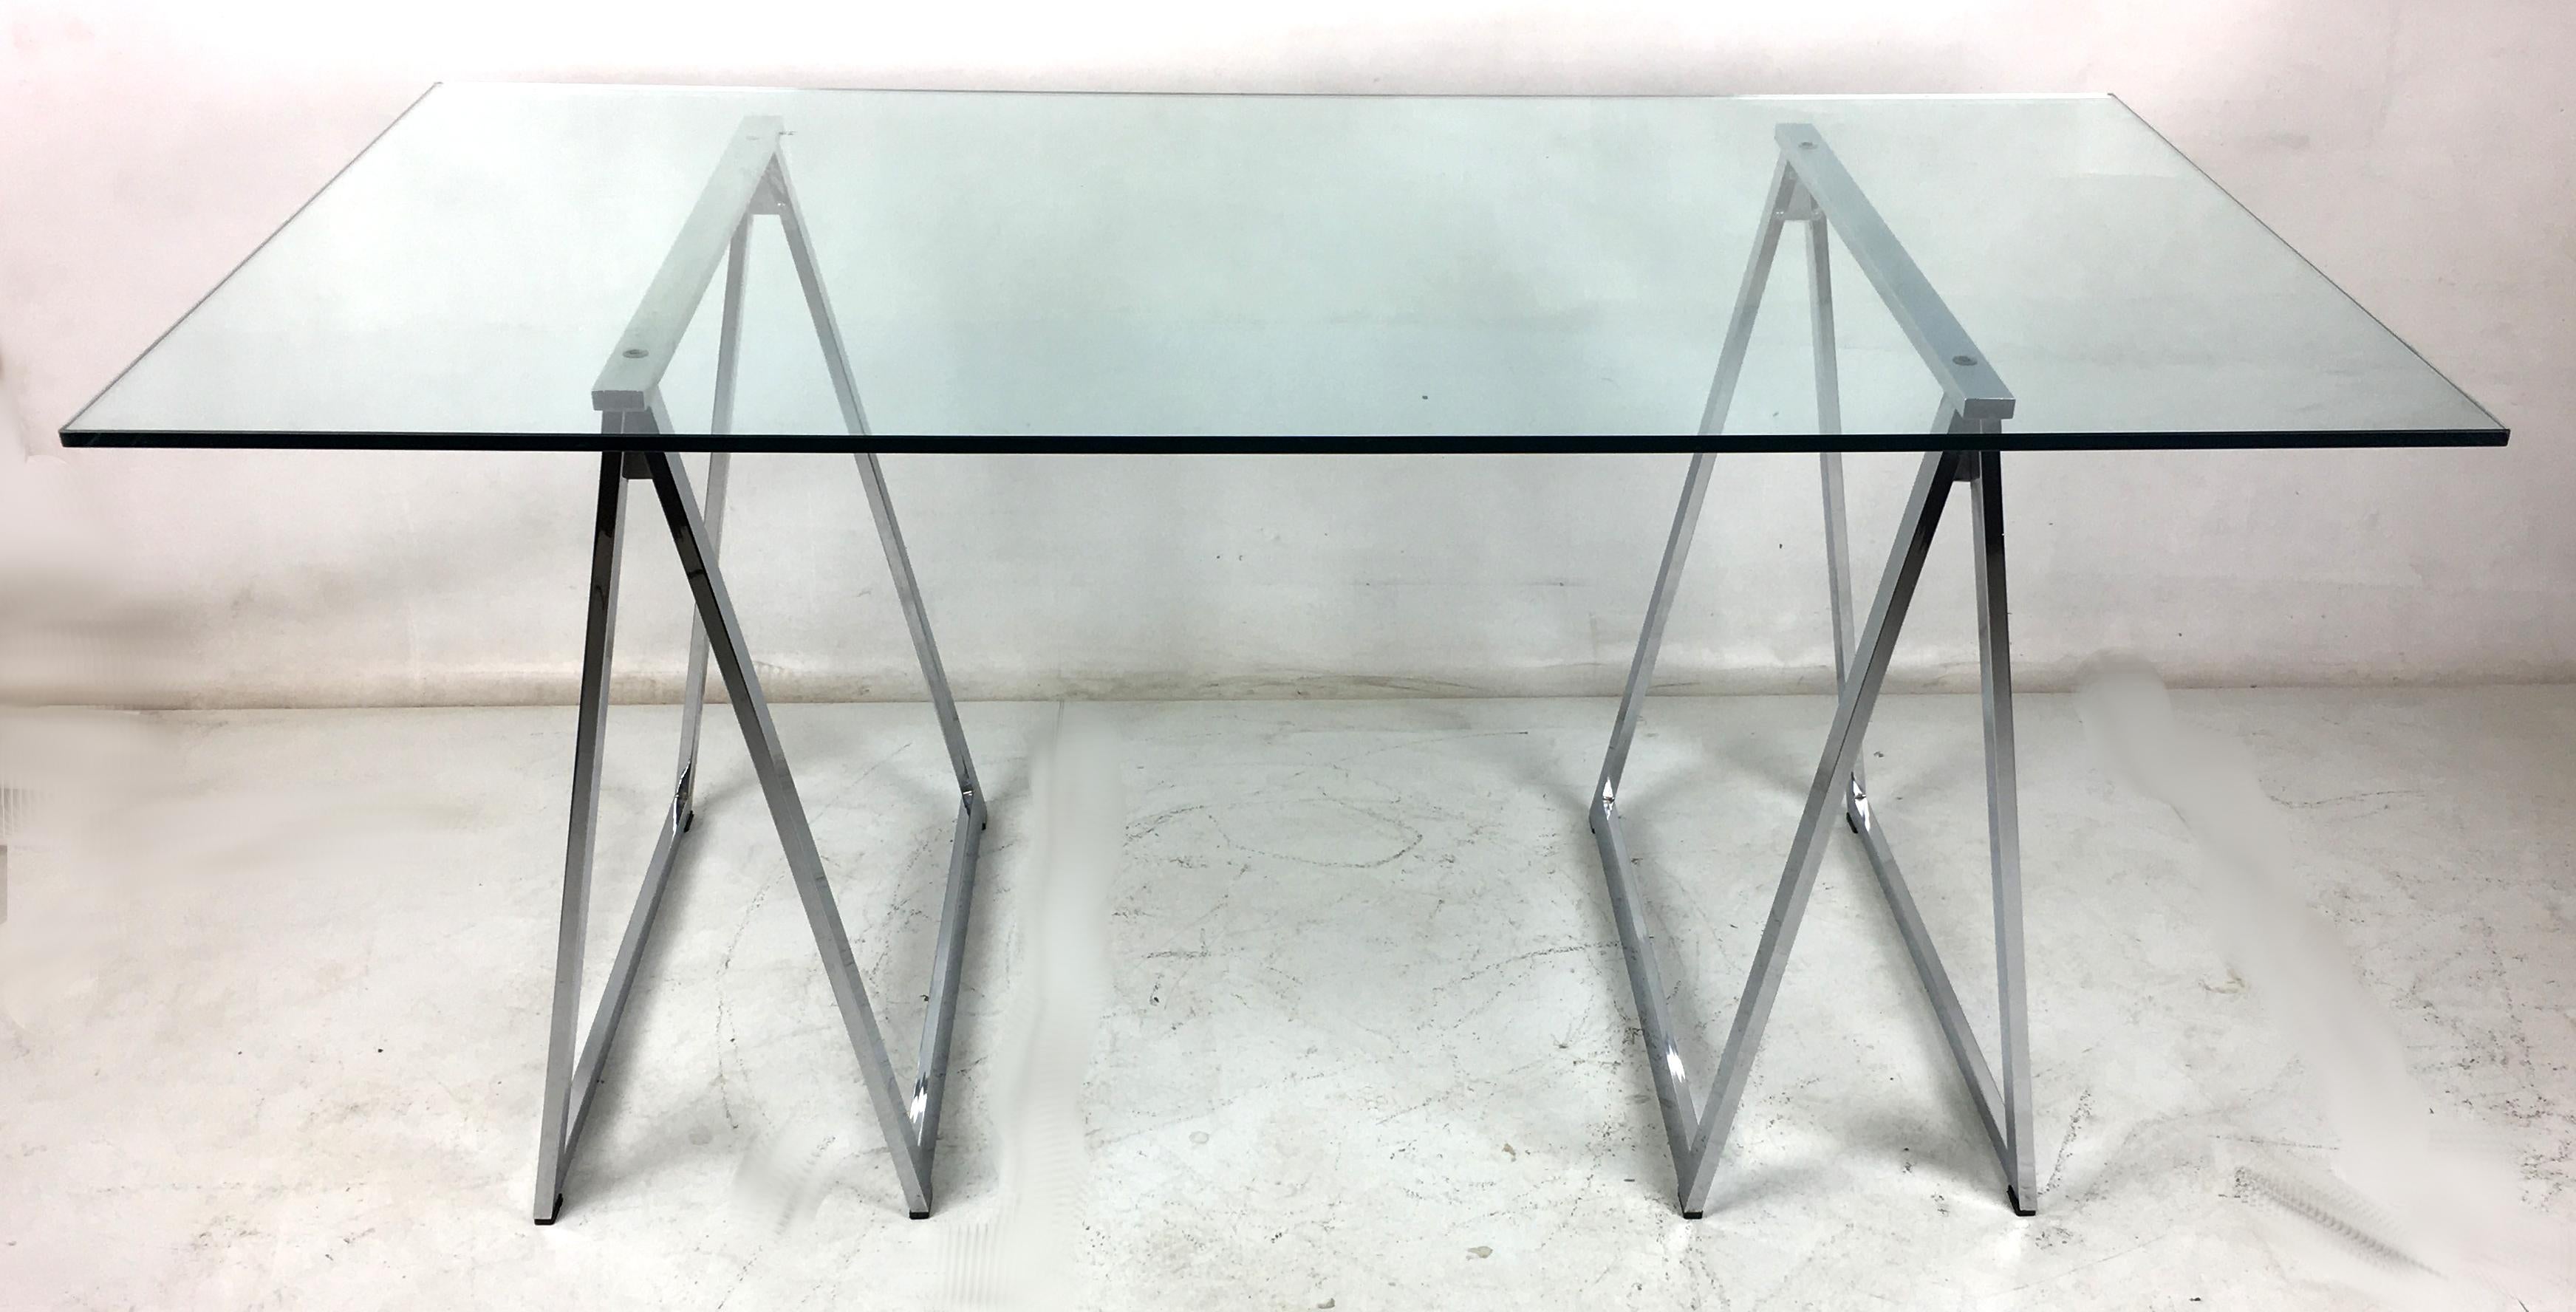 Original Milo Baughman chrome saw horse desk or dining table. The bases are in very good original condition with all its original glides and hardware.